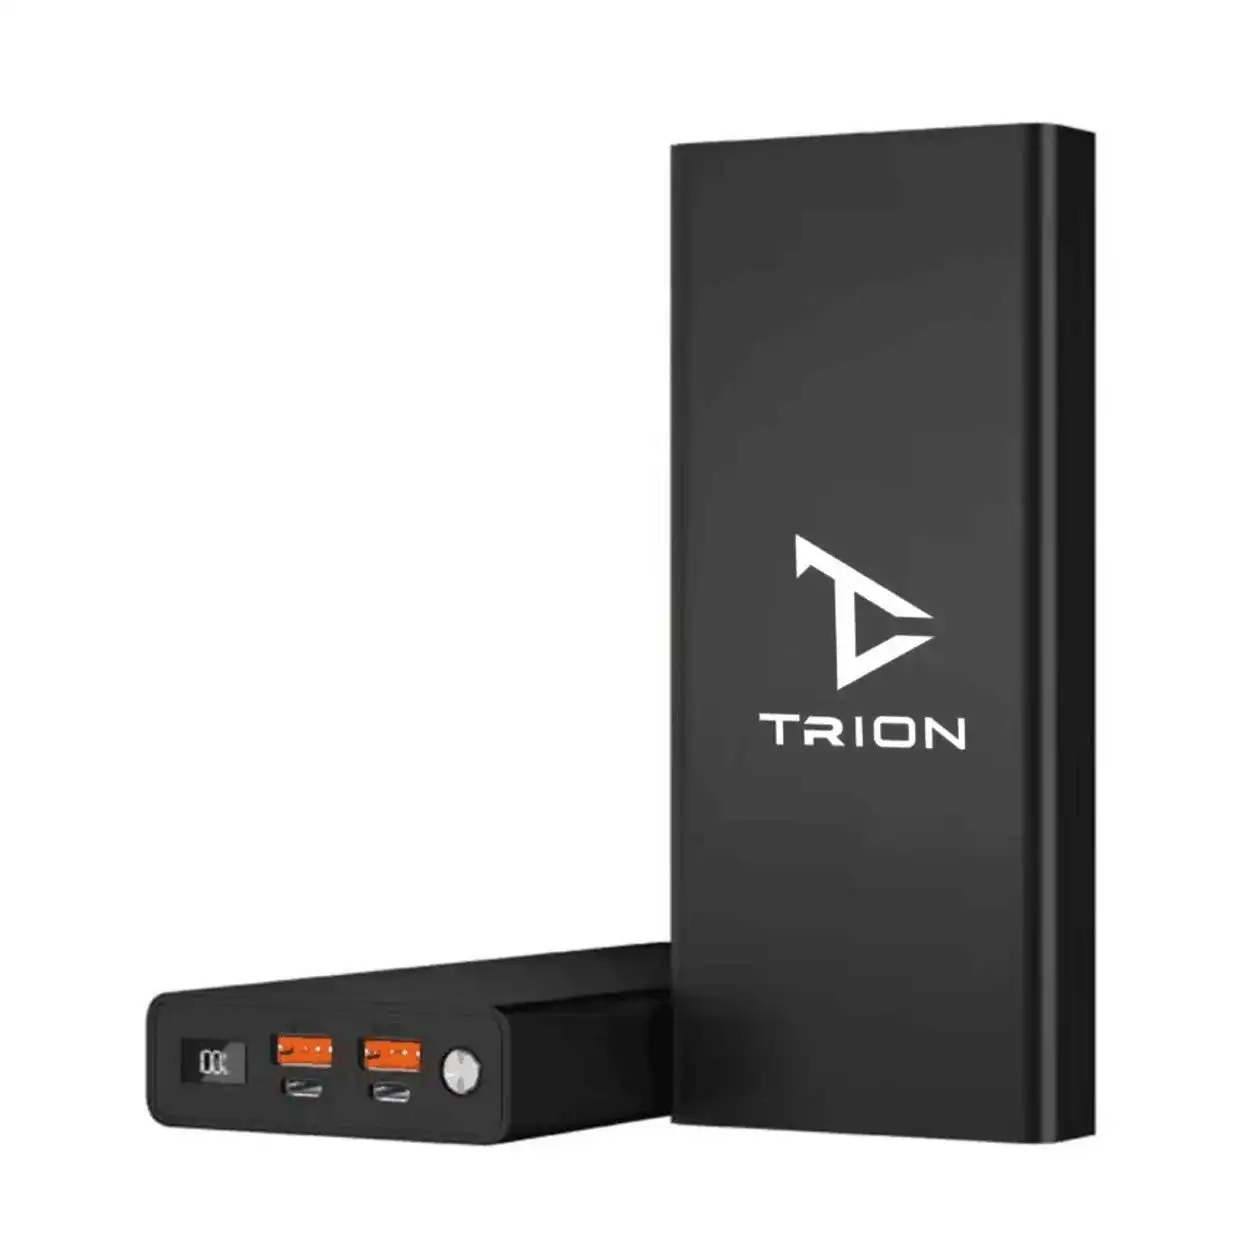 Trion 100W IS-LP03 30000mAh Power Bank With Digital Display, Dual USB & Type C Connectivity